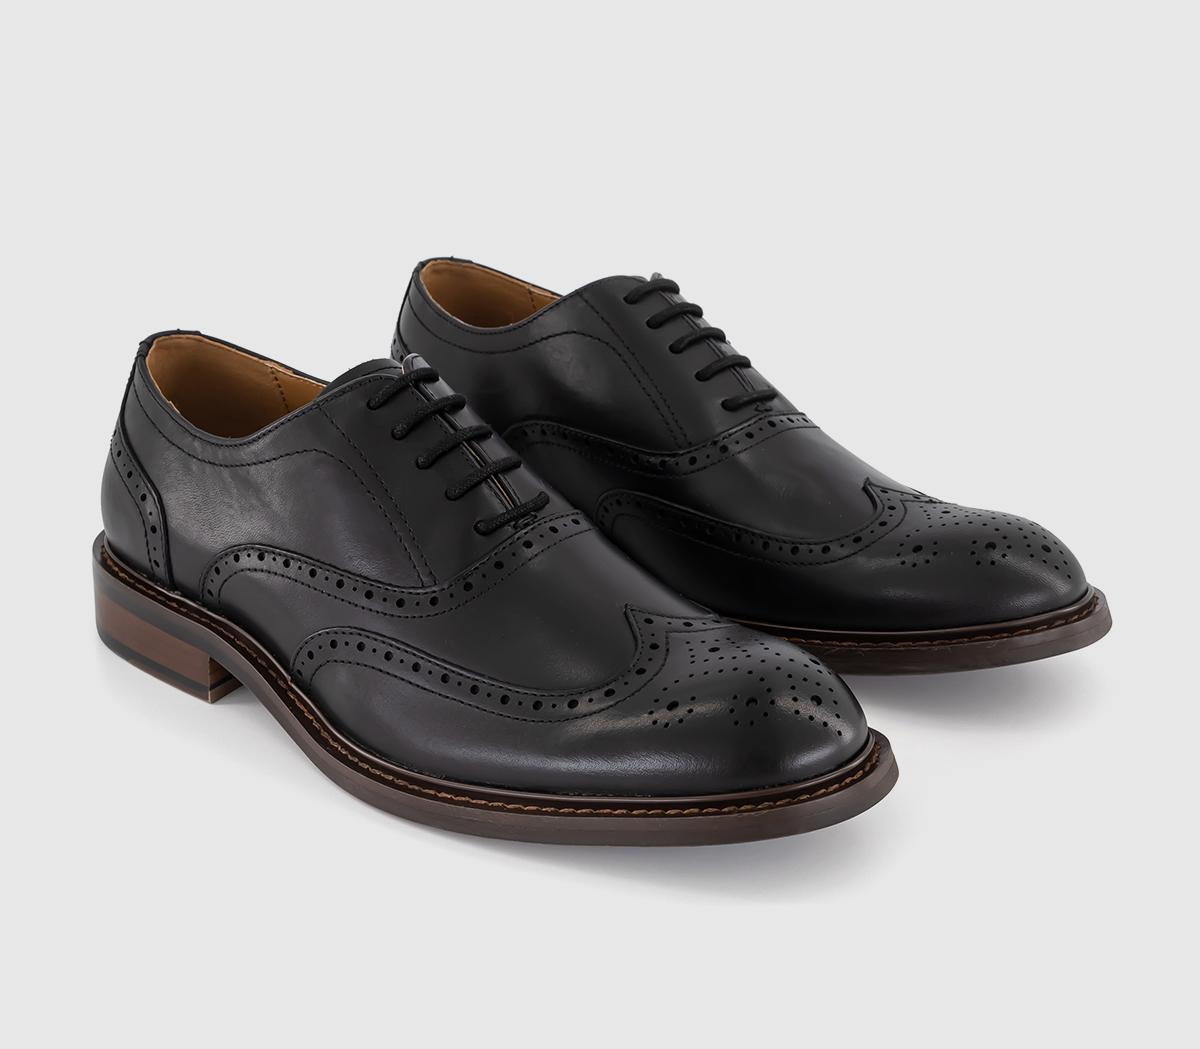 OFFICE Mens Maxwell Oxford Brogues Black Leather, 8